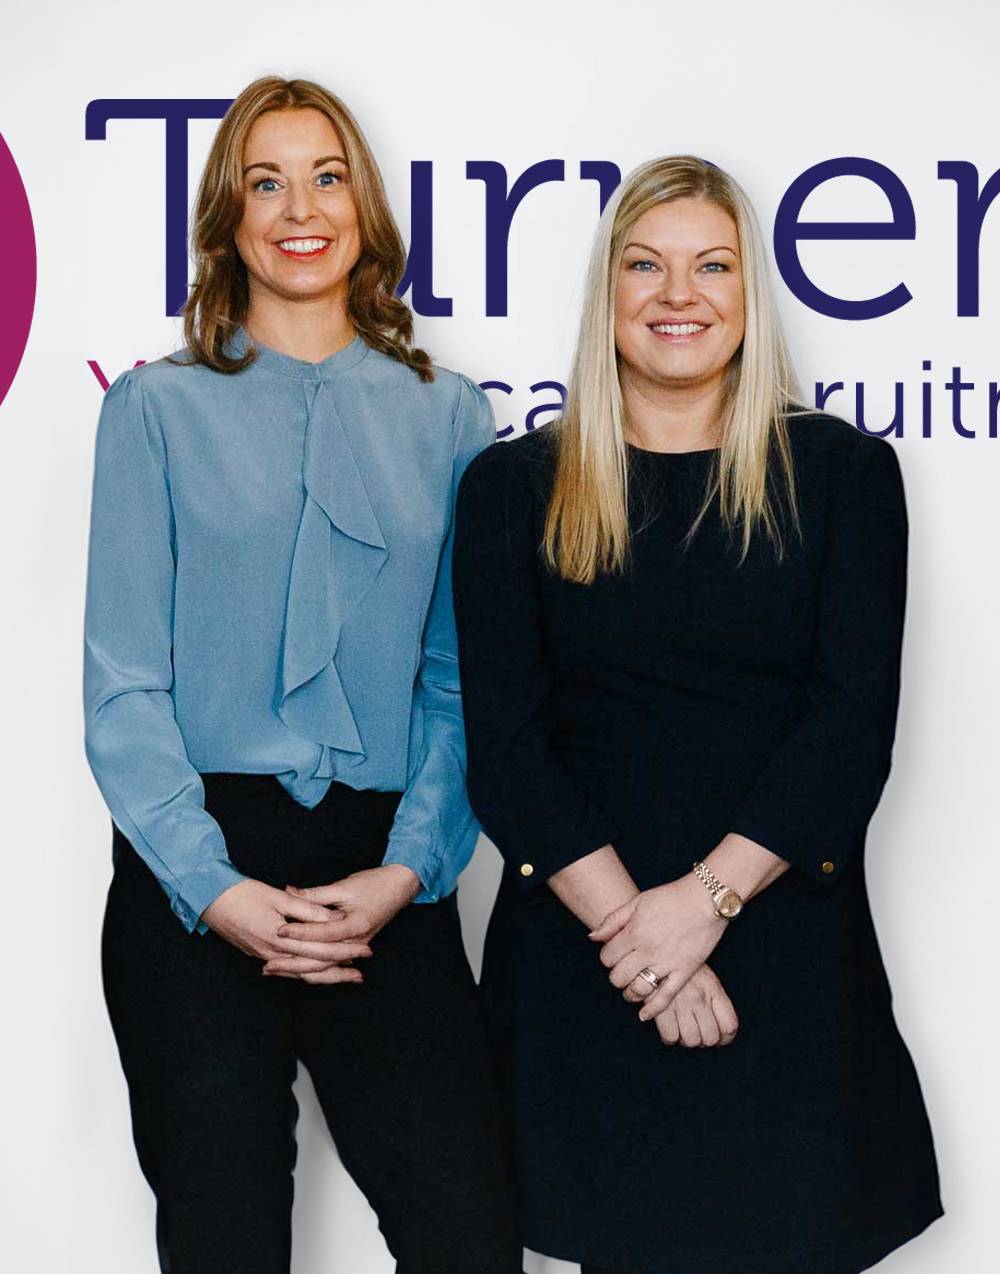 16 questions for 16 years in business as TurnerFox Recruitment